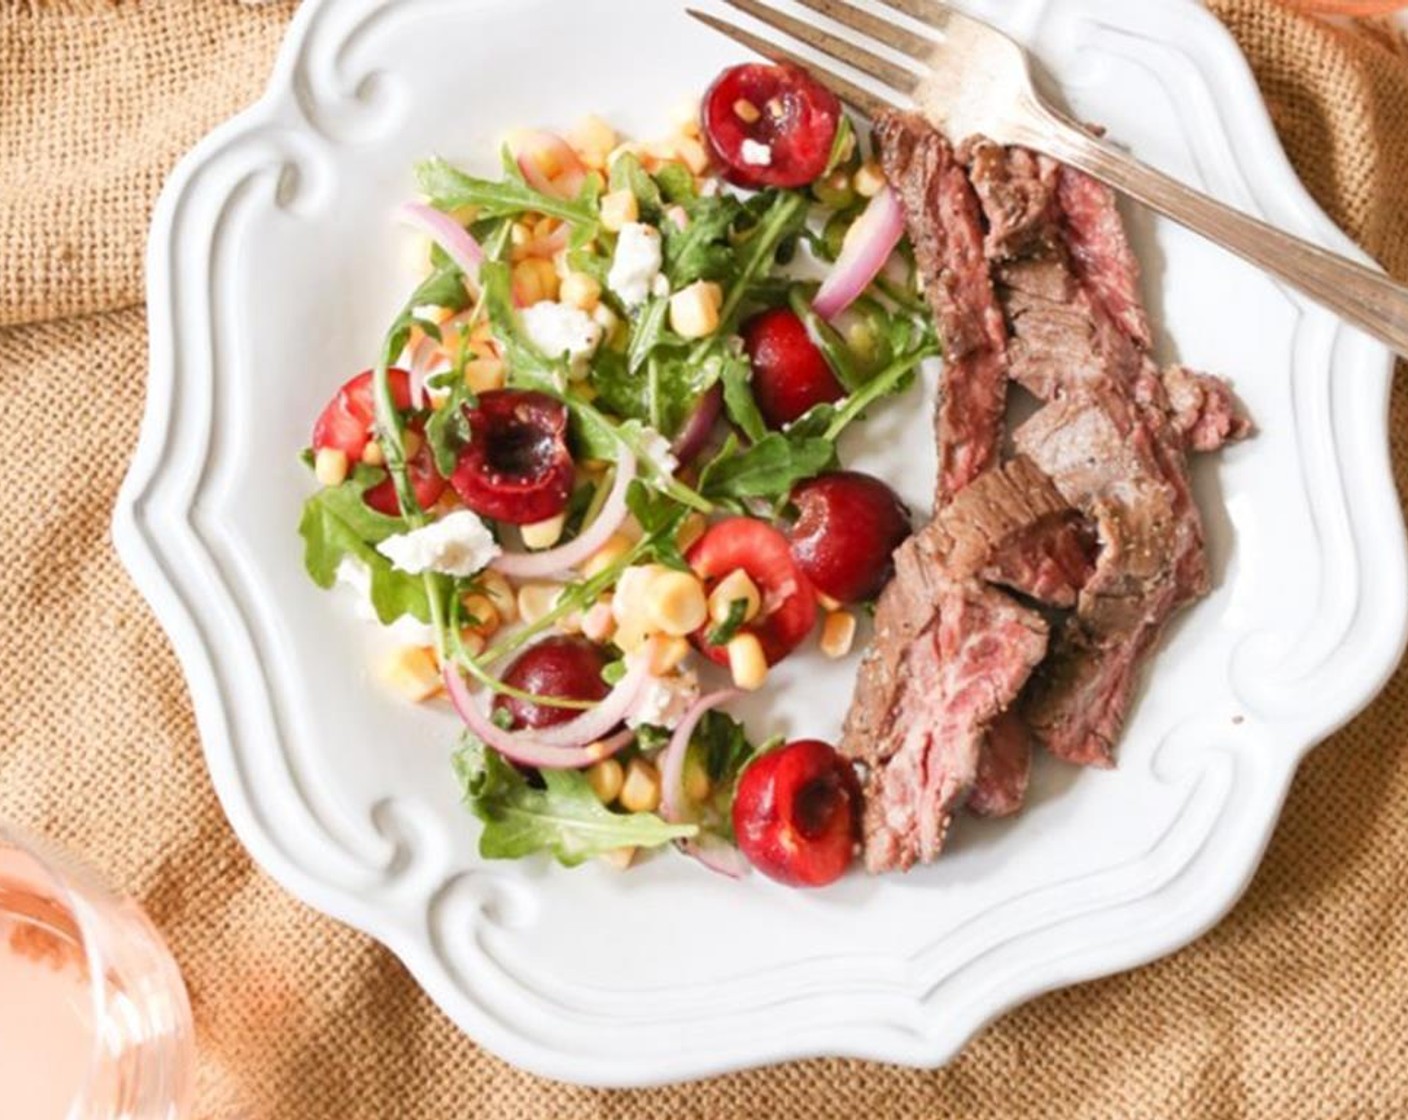 step 8 Transfer the salad to a serving bowl or plate and top with Goat Cheese (4 Tbsp) Serve the sliced steak alongside the salad.